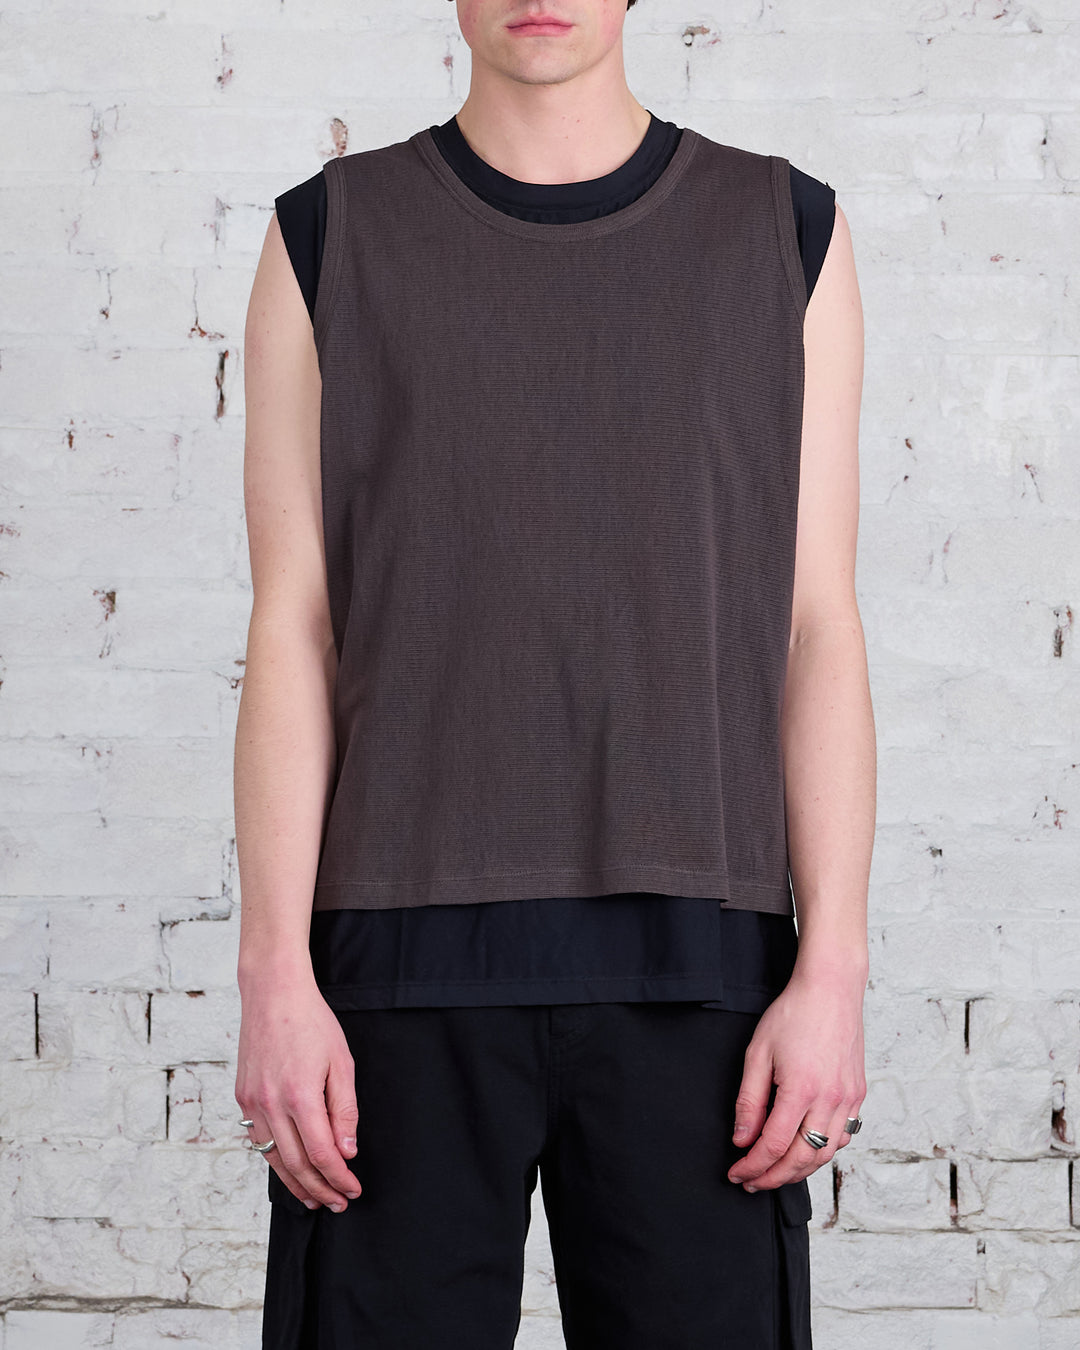 Our Legacy Reversible Gravity Tank Black/Antique Chocolate